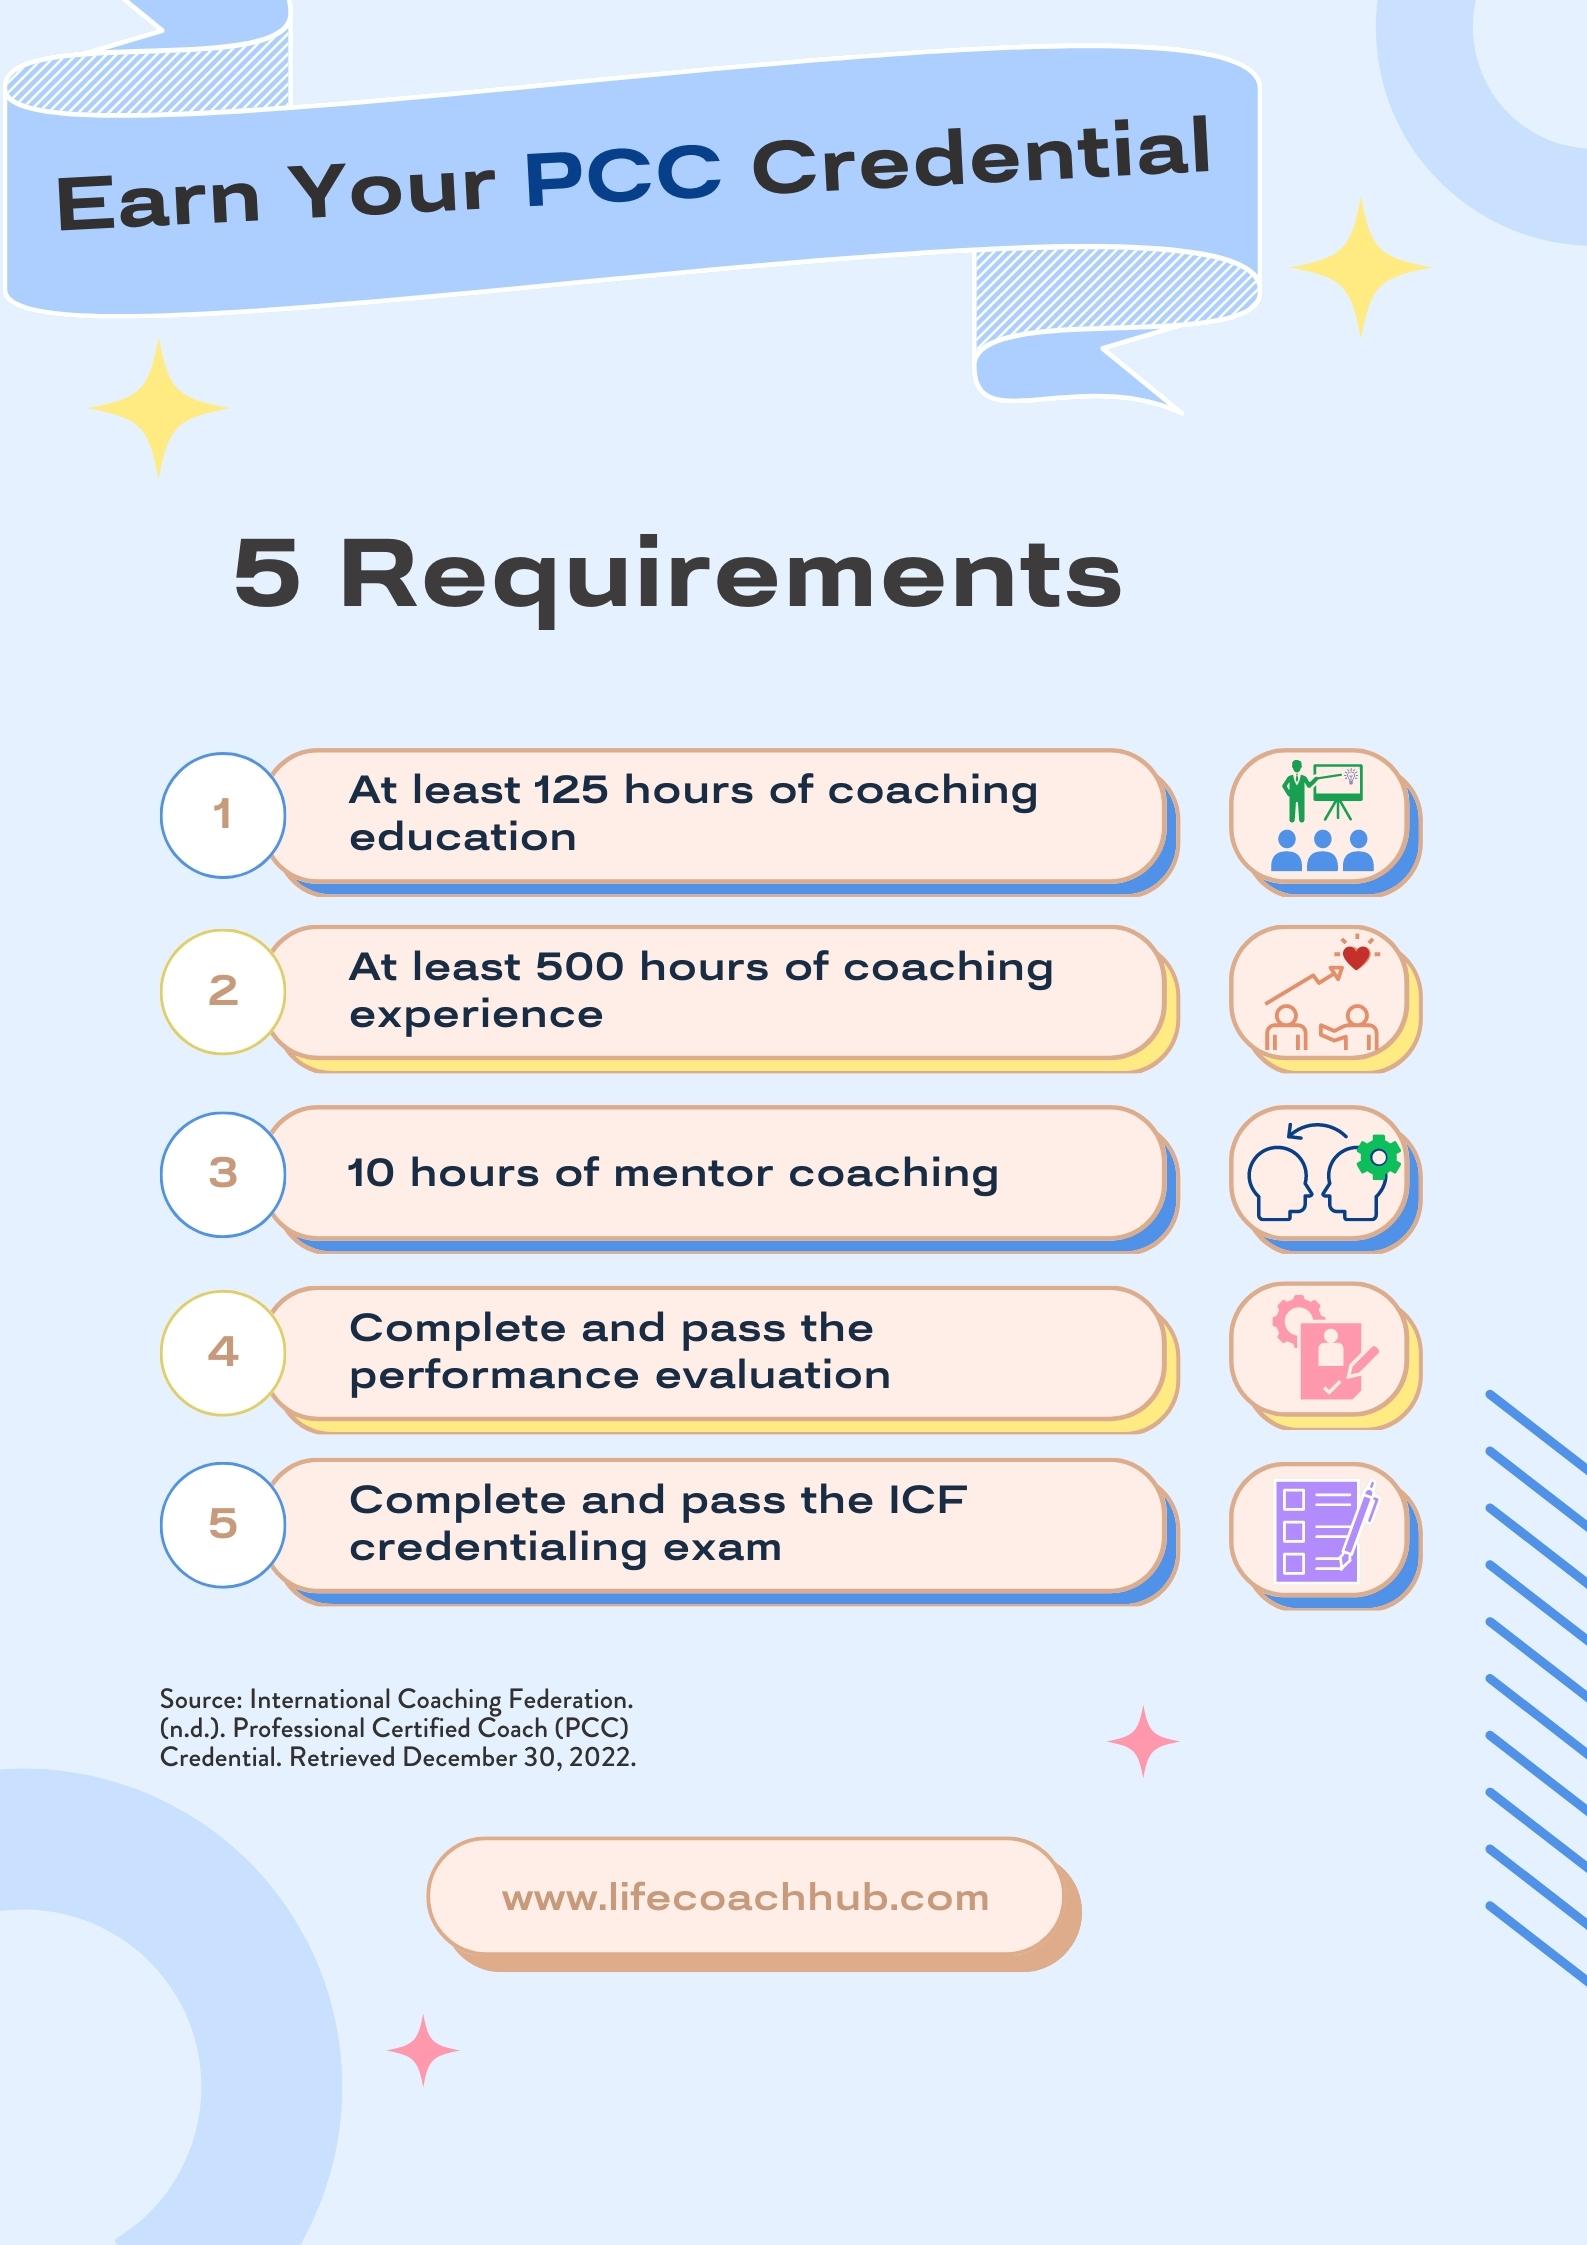 The 5 requirements to be a PCC-certified coach